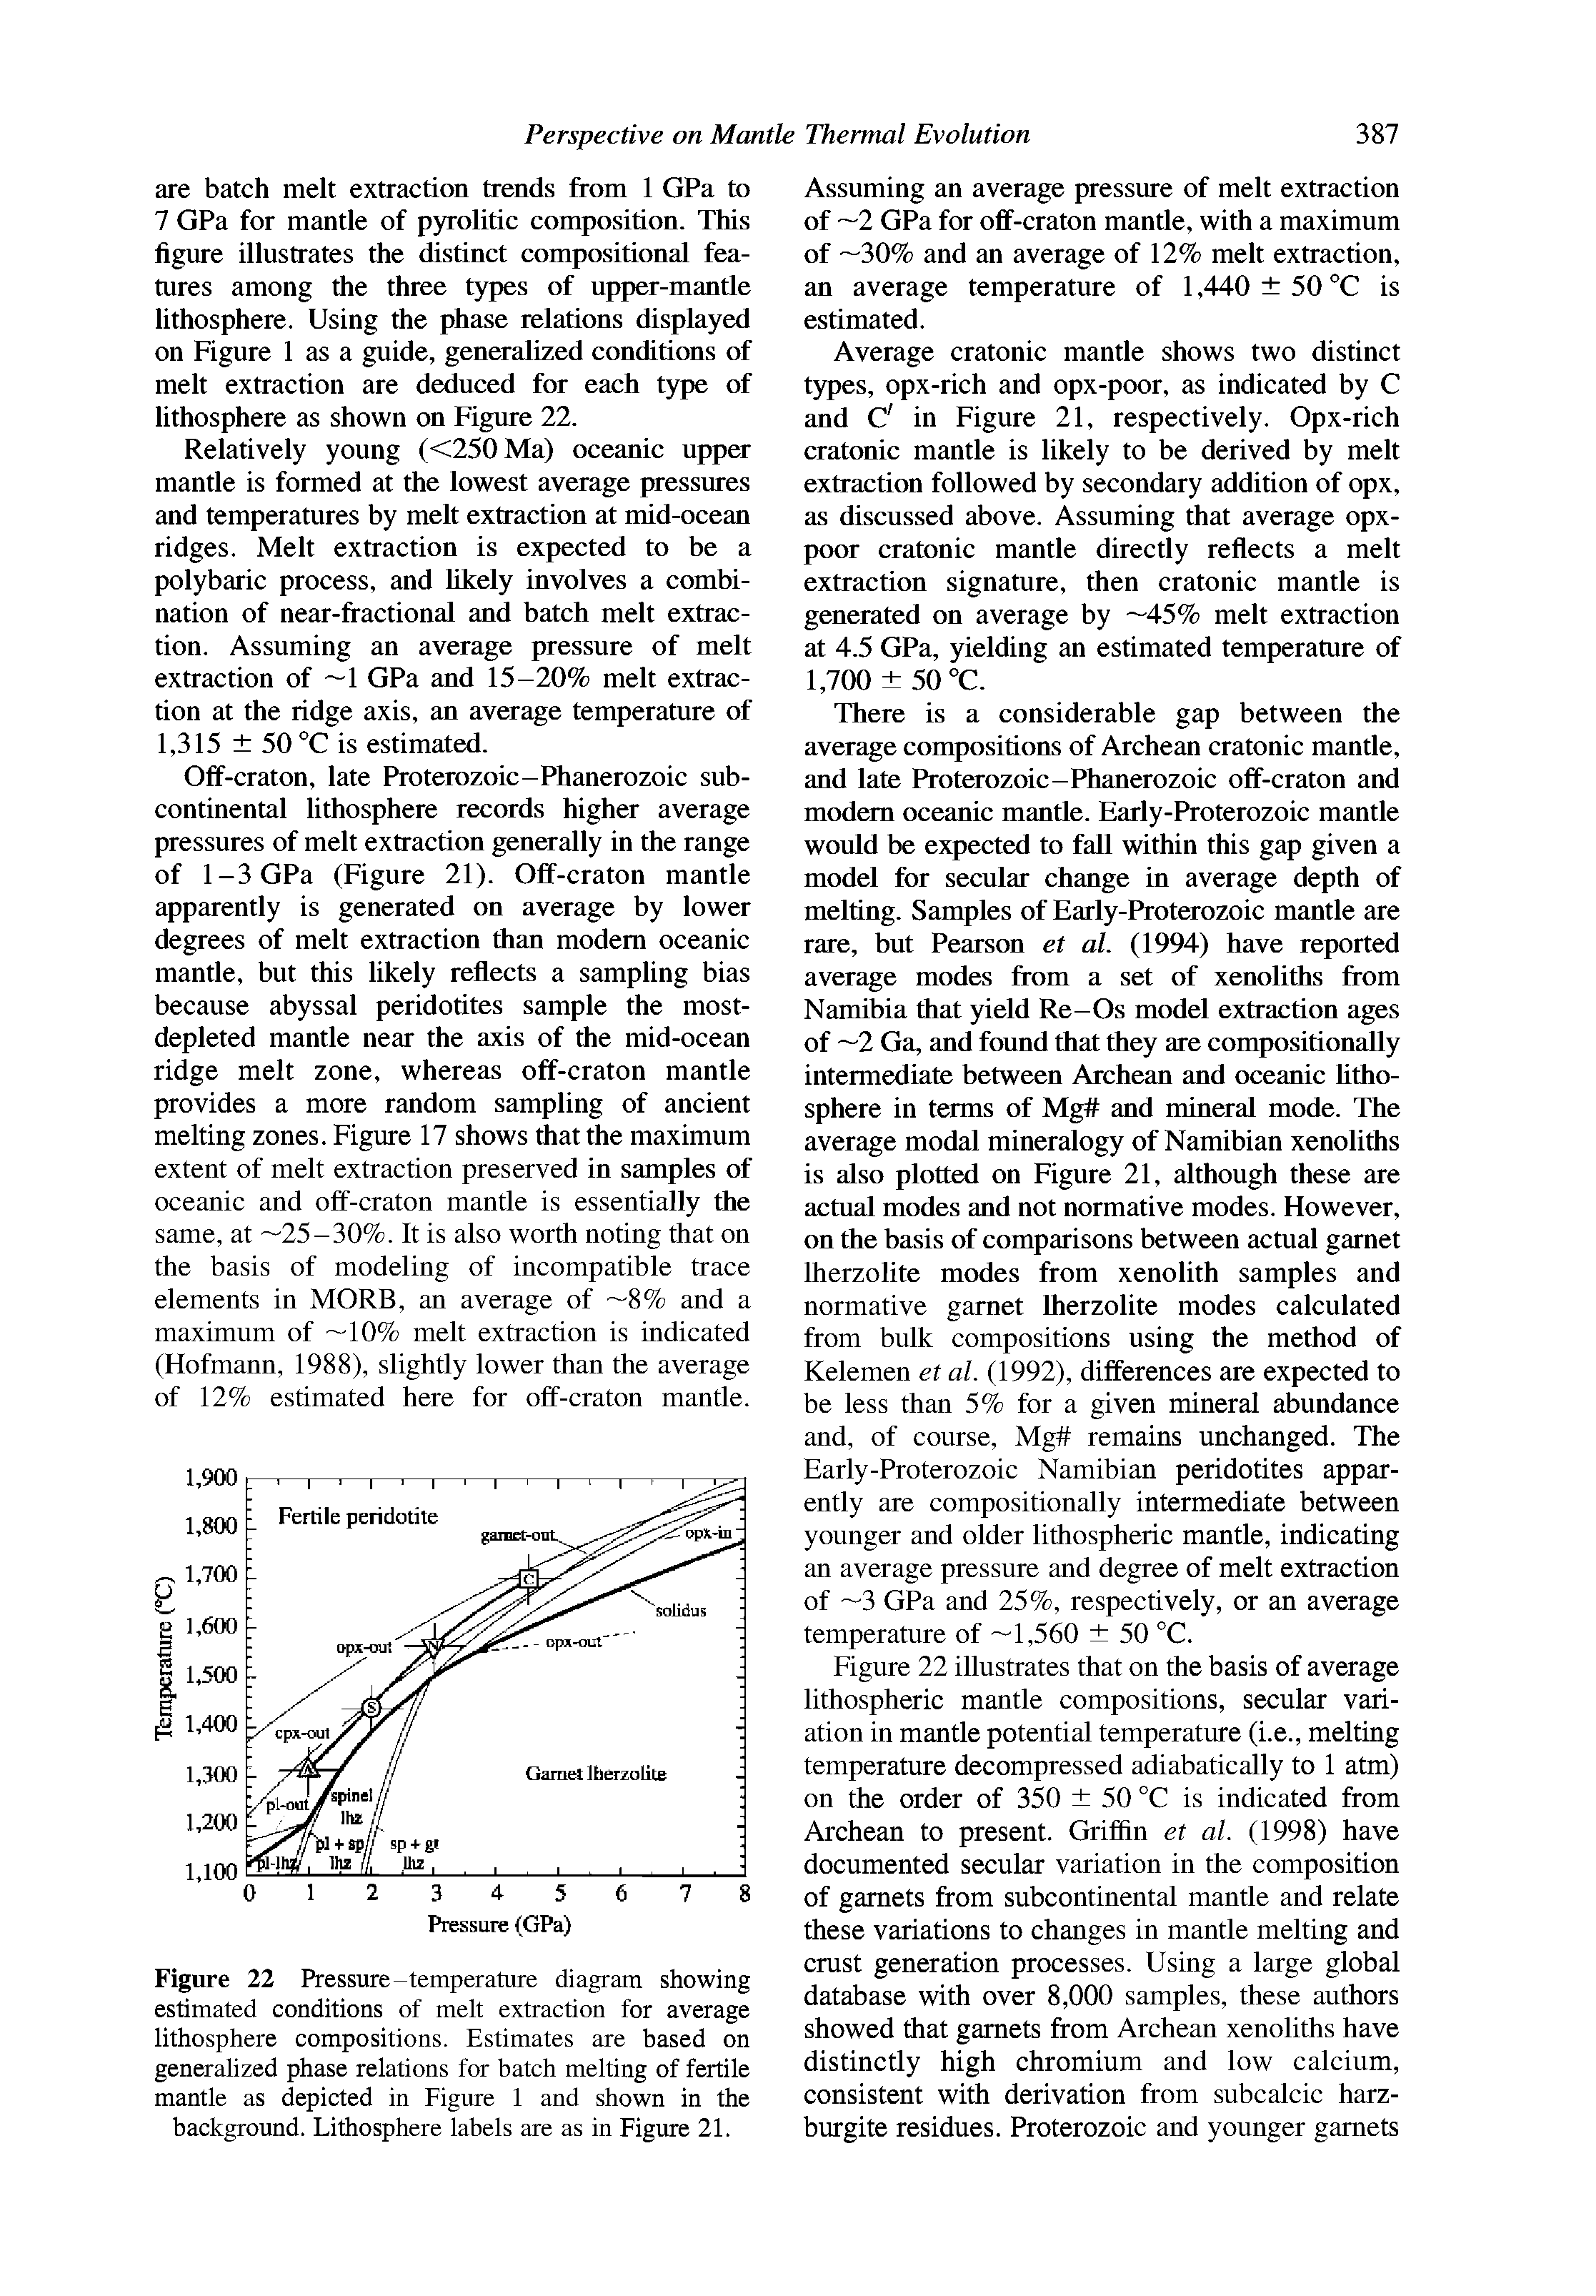 Figure 22 Pressure-temperature diagram showing estimated conditions of melt extraction for average lithosphere compositions. Estimates are based on generalized phase relations for batch melting of fertile mantle as depicted in Figure 1 and shown in the background. Lithosphere labels are as in Figure 21.